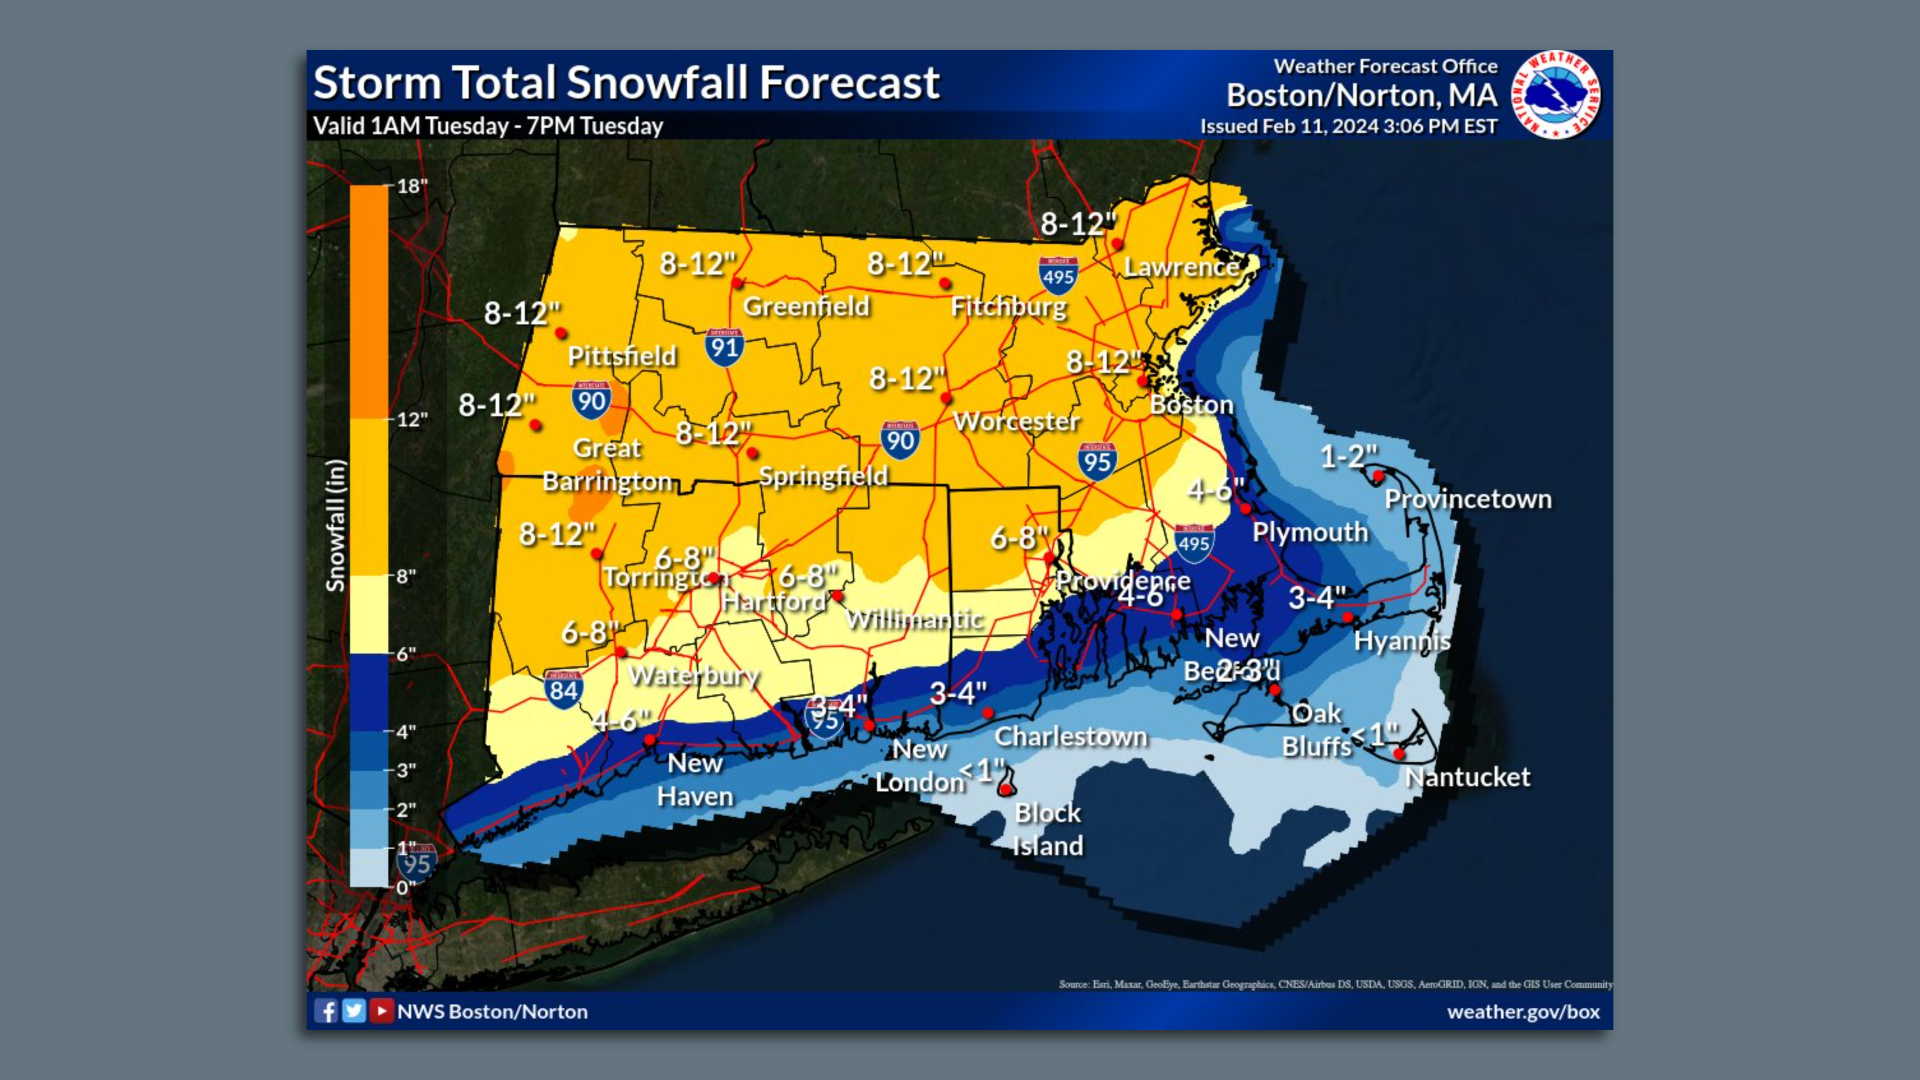 A snowfall forecast from the National Weather Service showing most of Massachusetts, minus the Cape and Islands could get 8-12 inches of snow on Tuesday, Feb. 13, 2024.